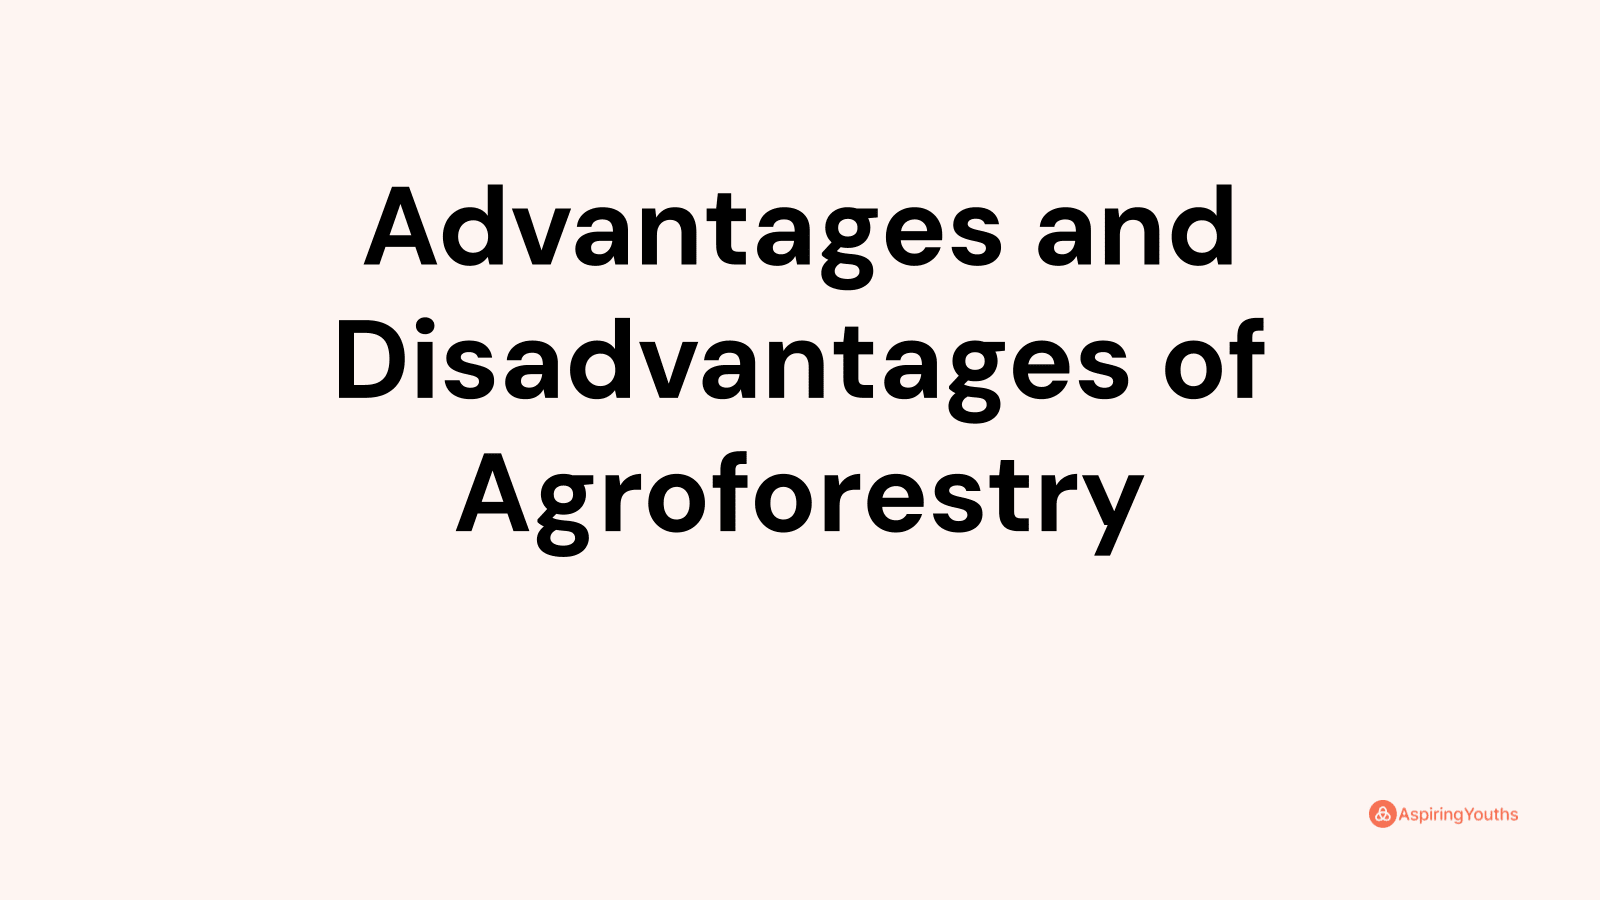 Advantages and disadvantages of Agroforestry